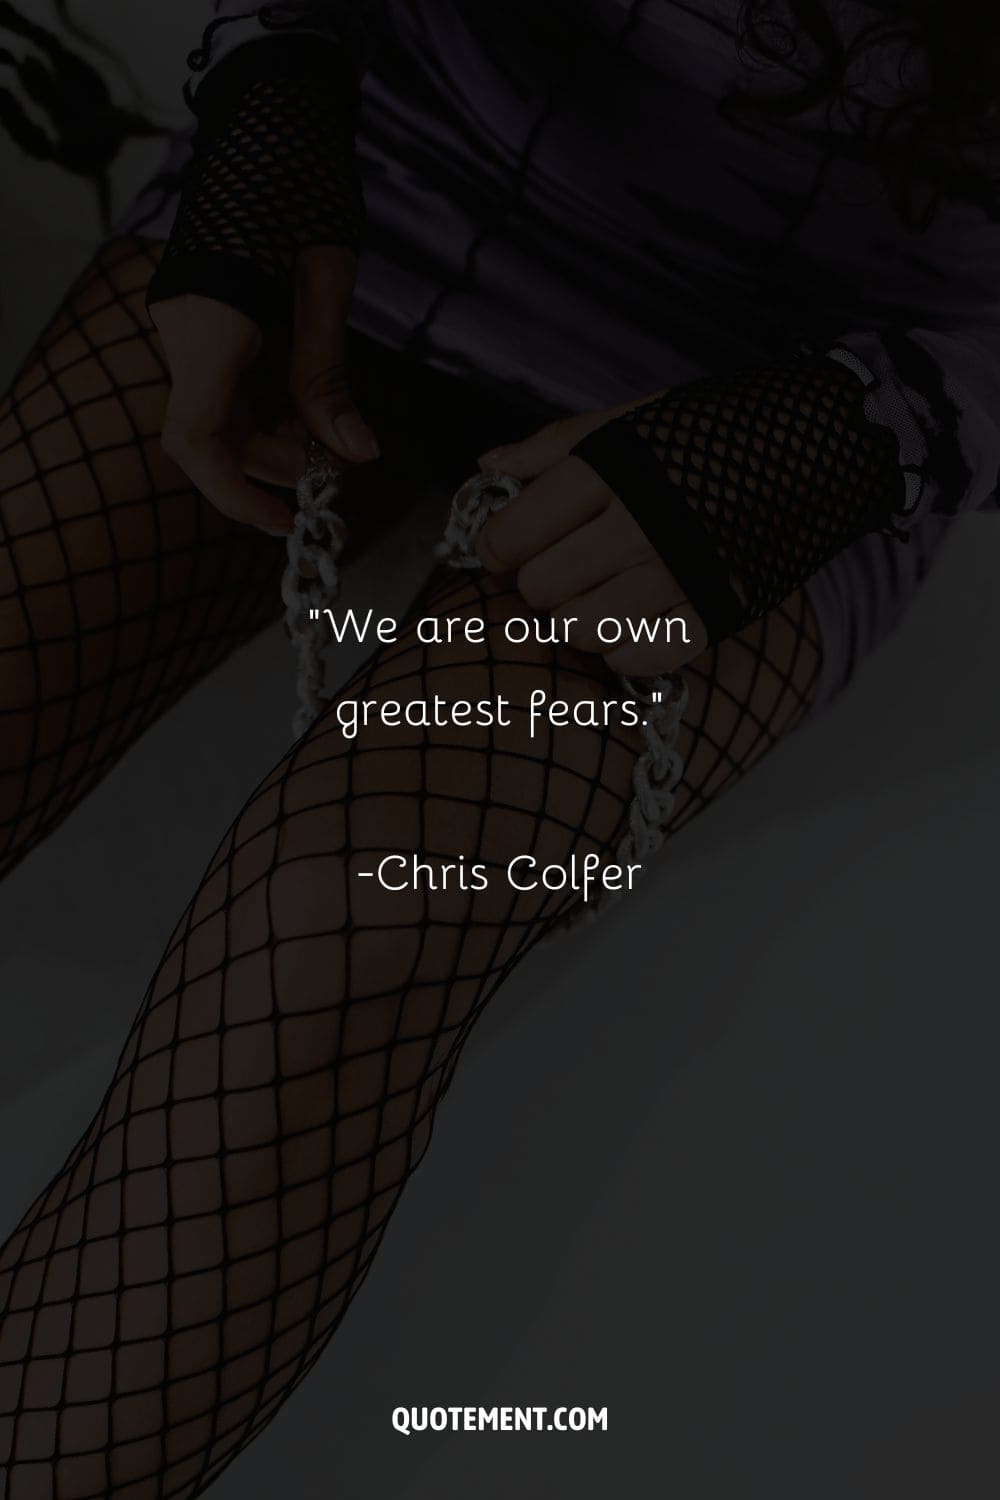 We are our own greatest fears.